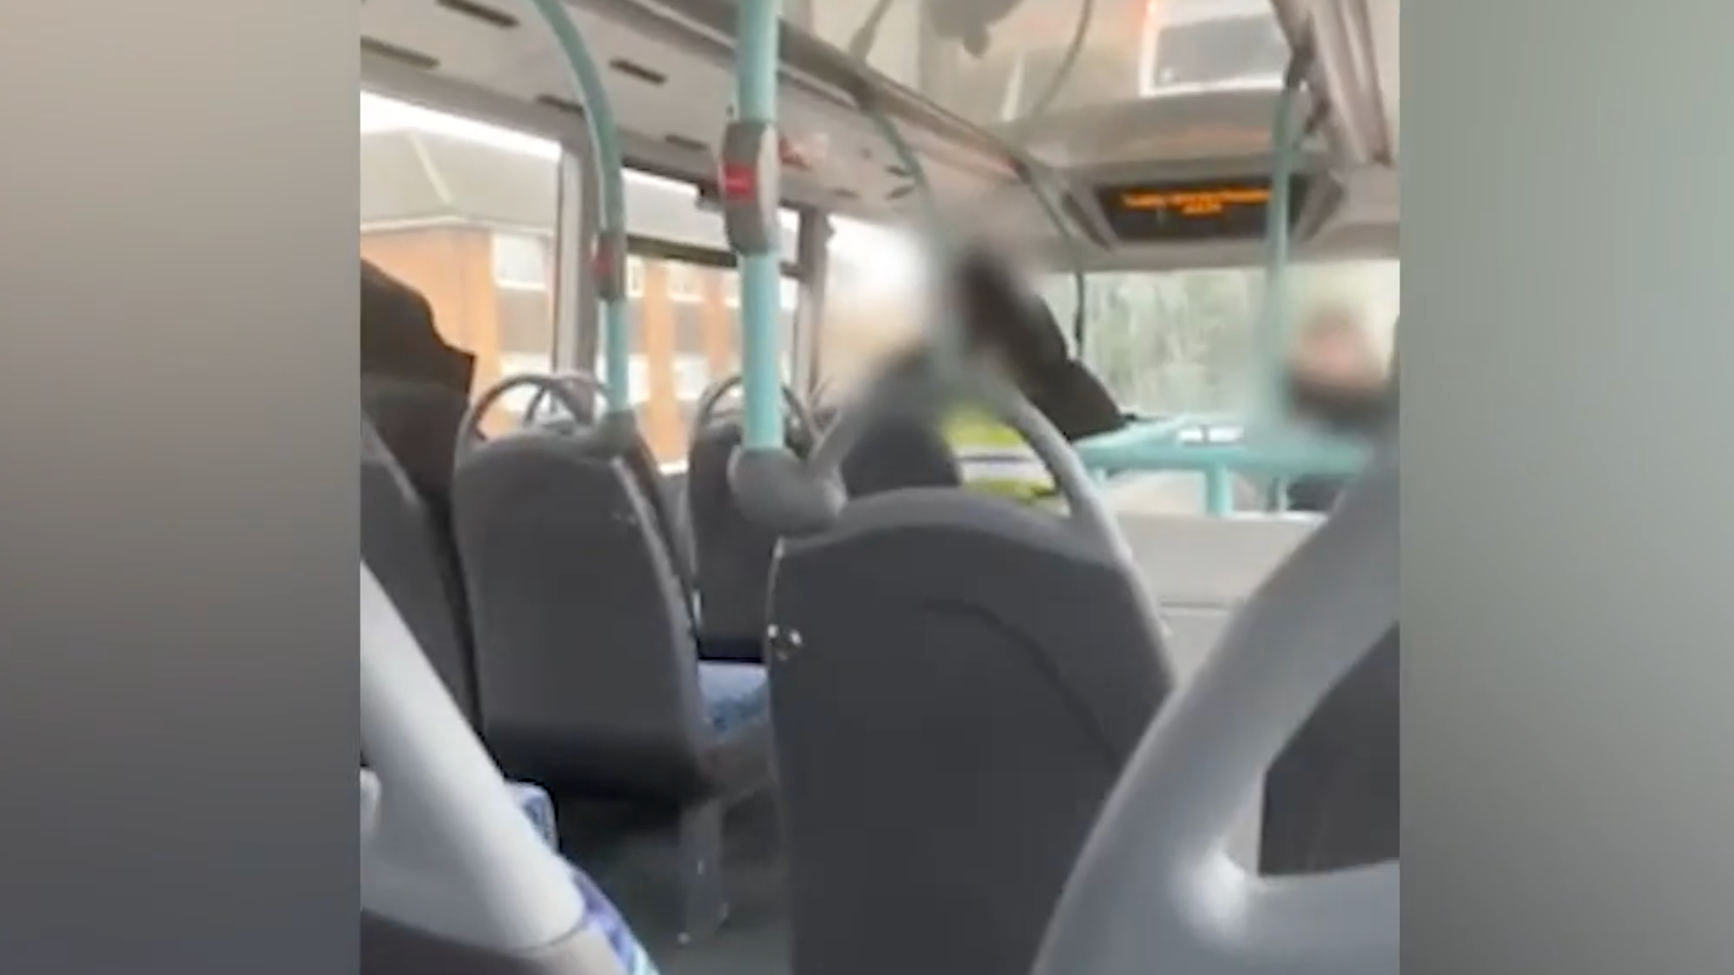 Buss School Girl Badmasti - Schoolgirl, 13, 'punched and kicked by woman' in terrifying West London bus  attack | ITV News London